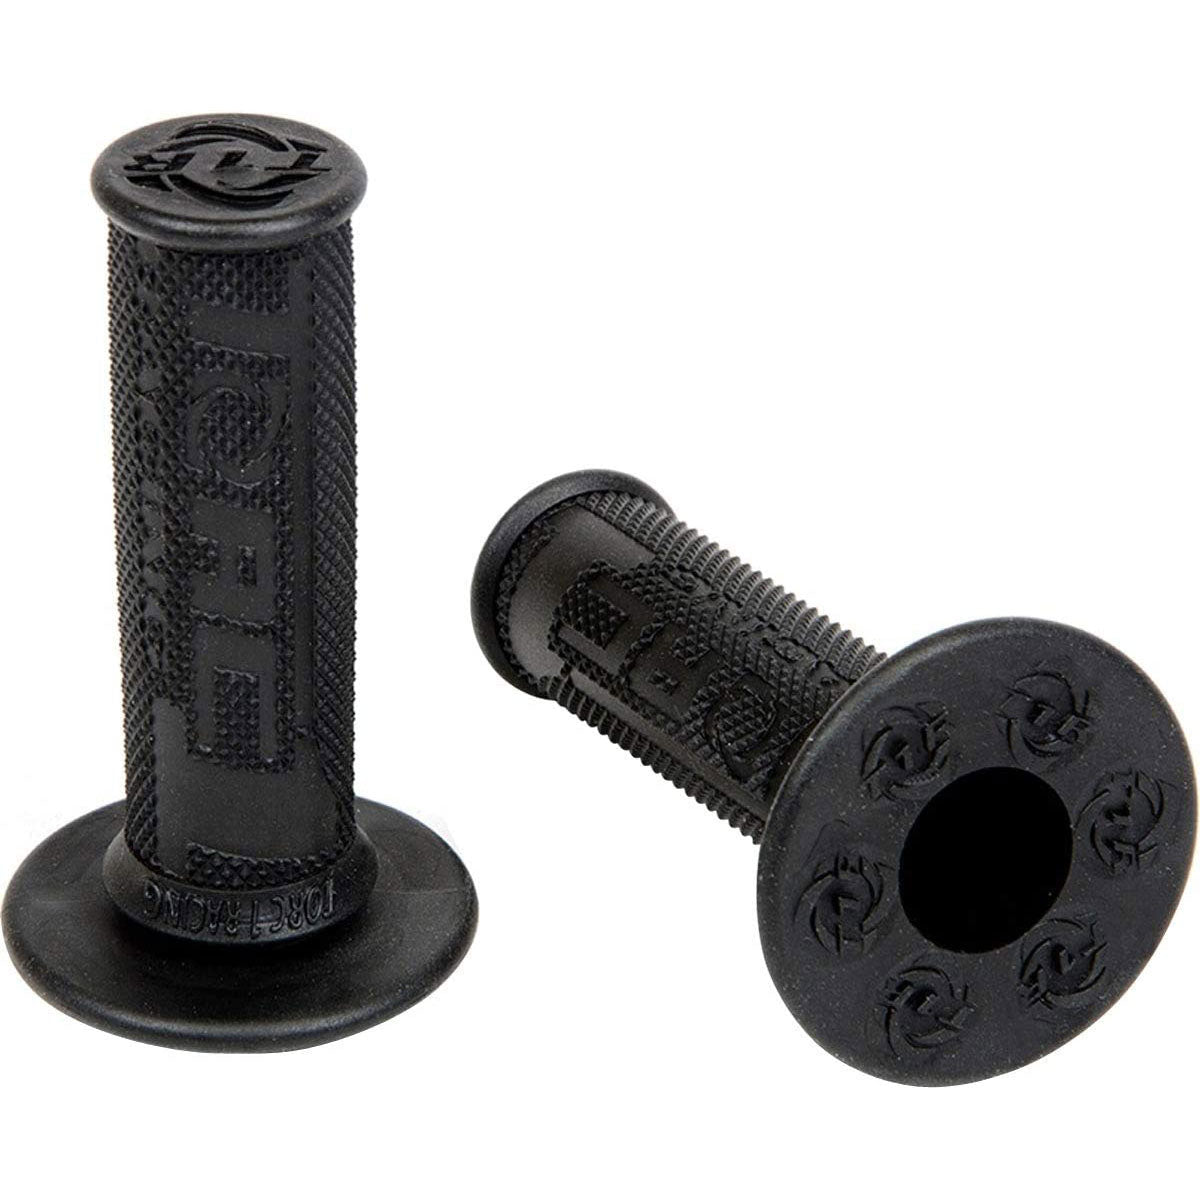 Torc1 Racing Hot Lap Mini Motorcycle Off-Road Hand Grips-111